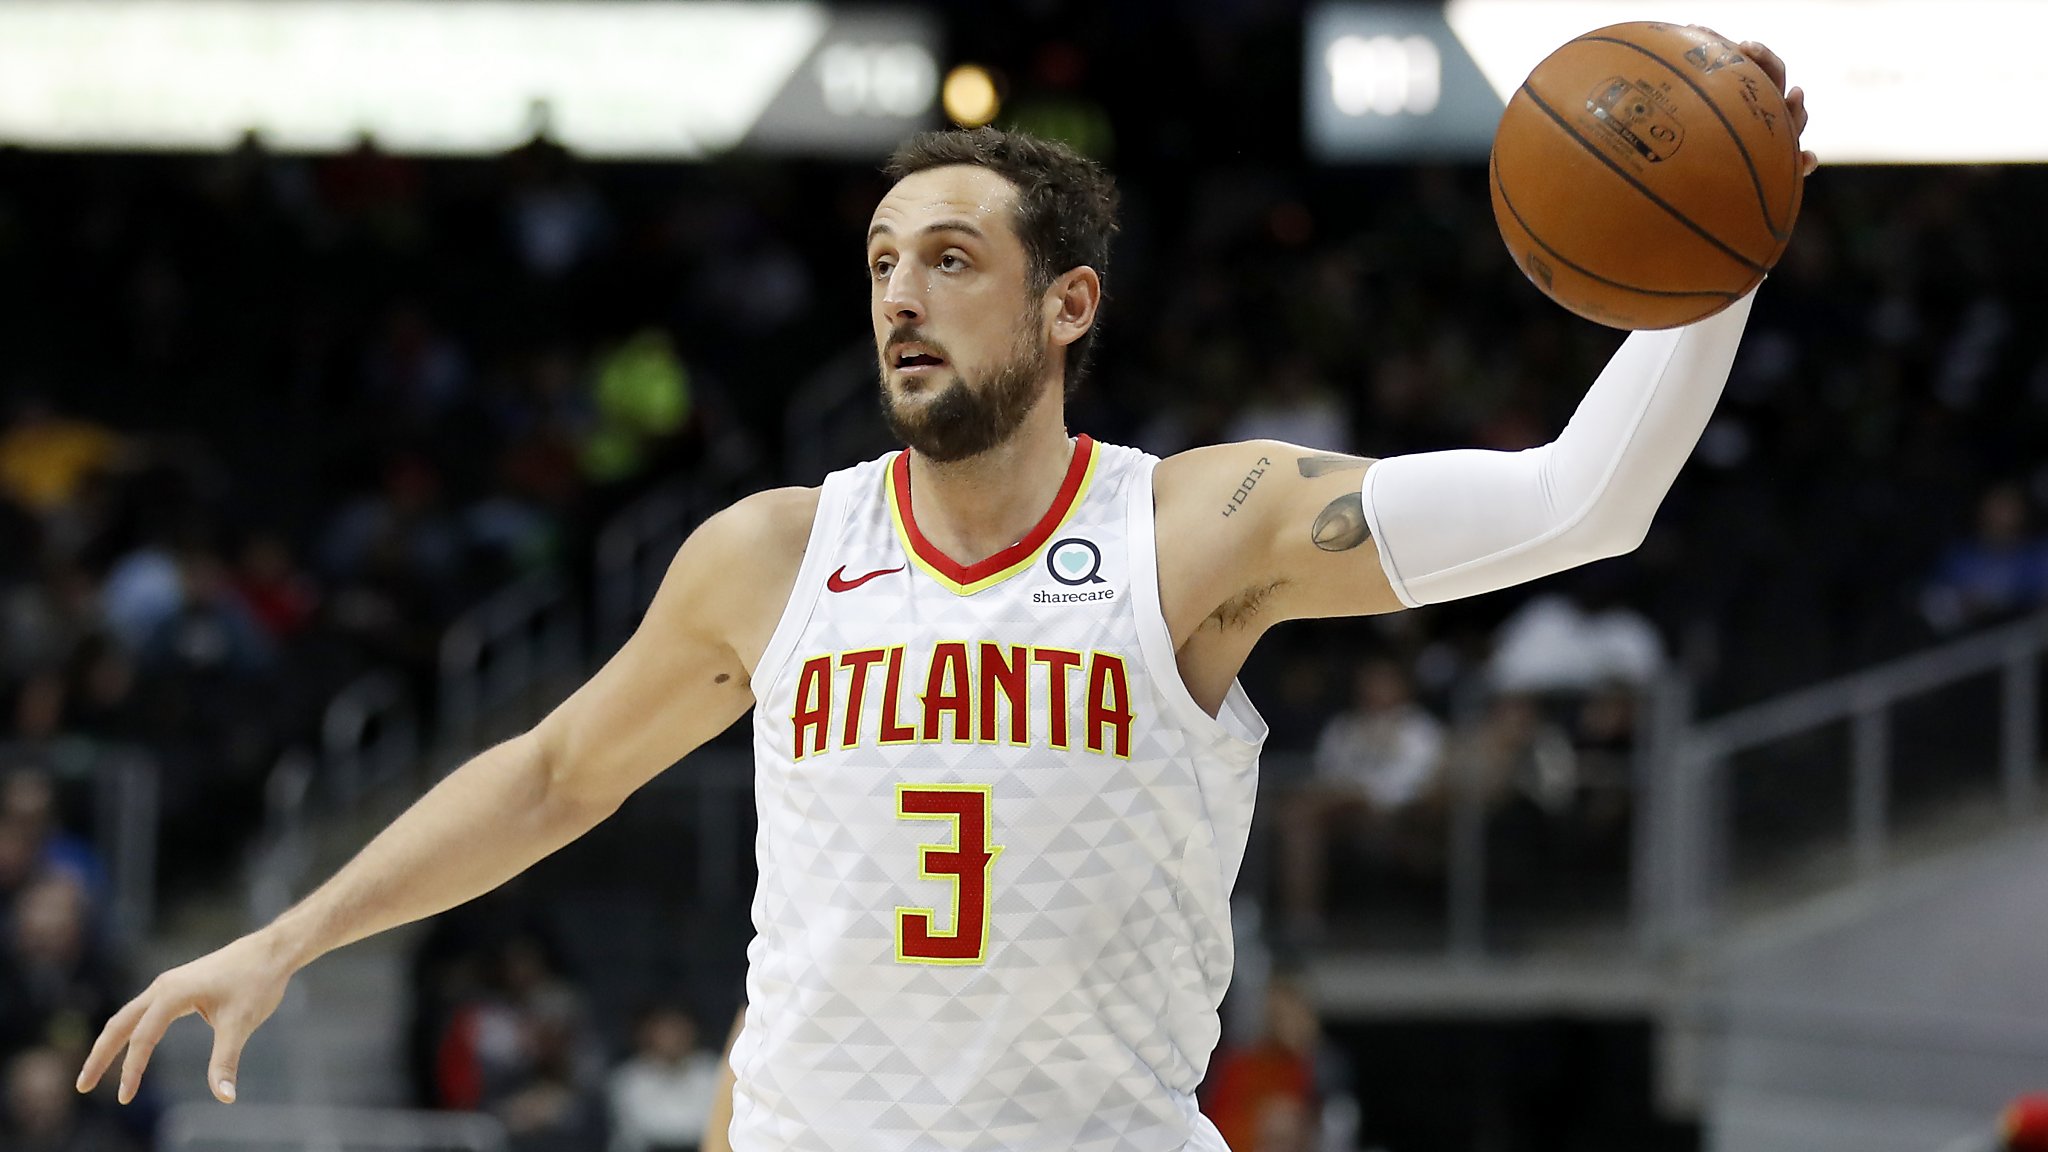 Atlanta Hawks guard Marco Belinelli (3) goes high to pass while